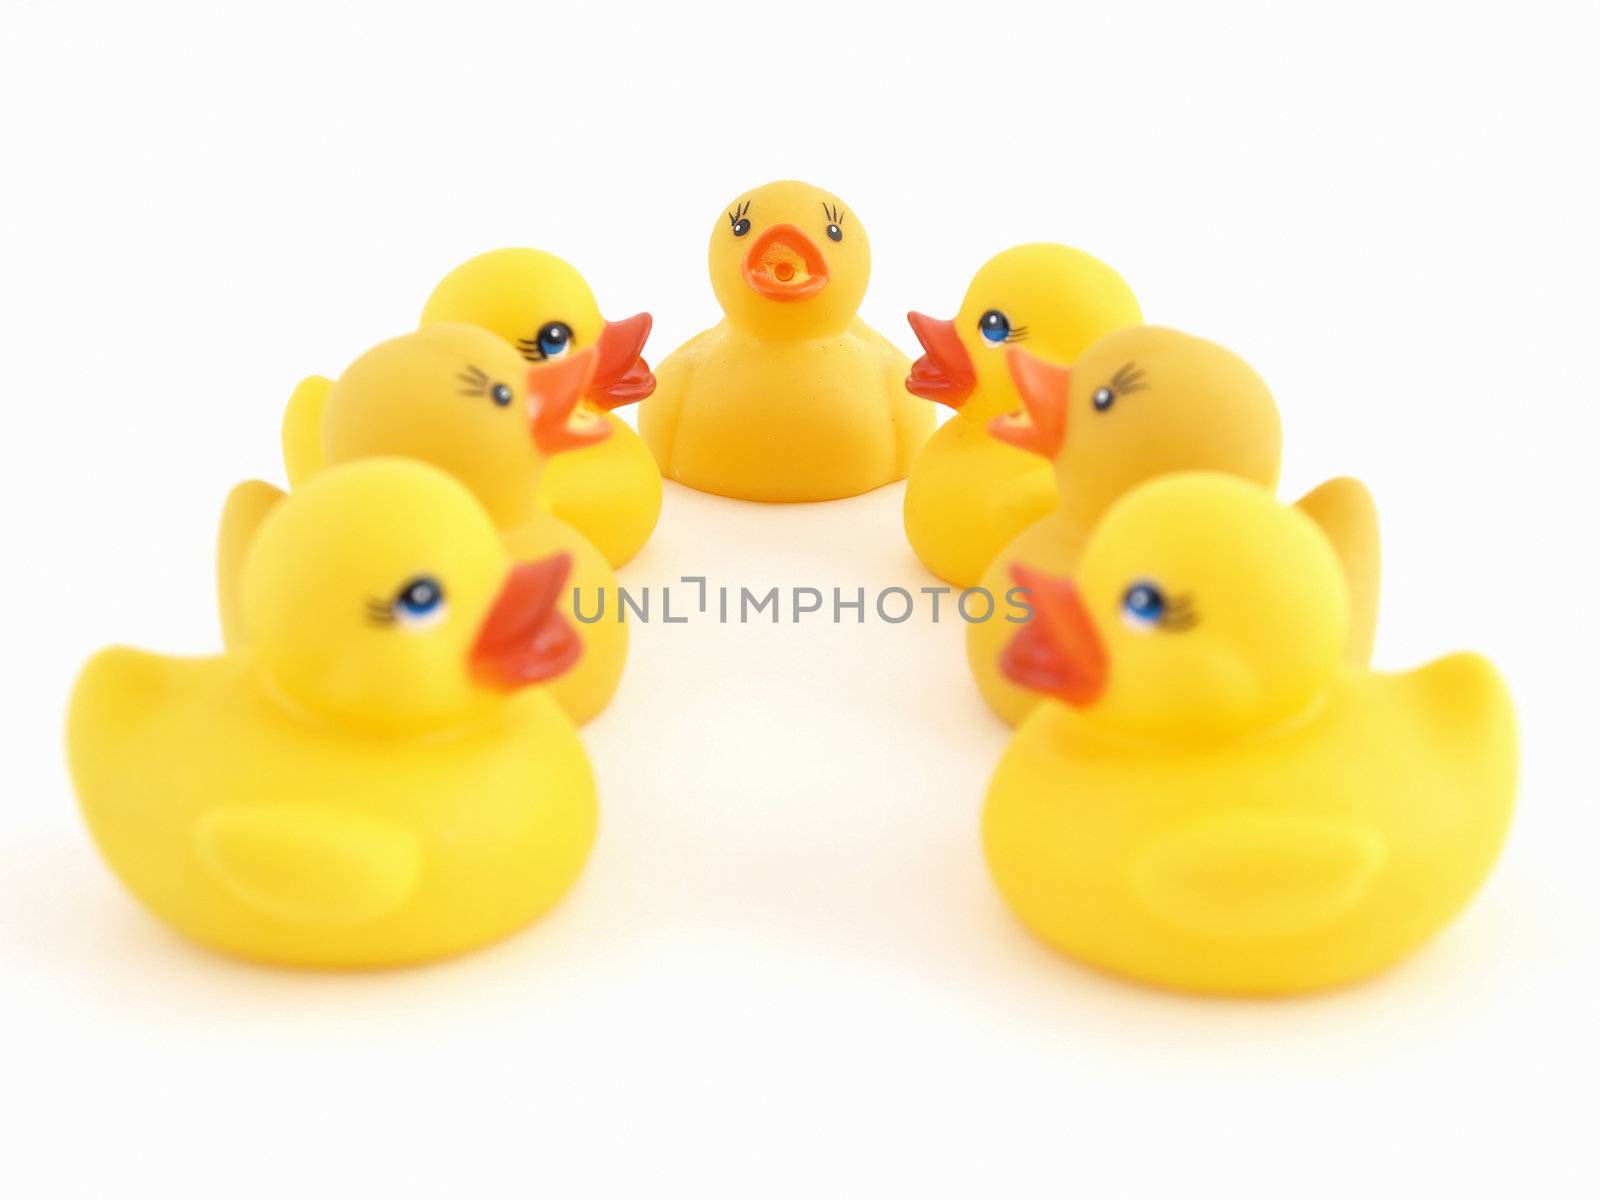 Cute yellow rubber ducks assembled in a horseshoe pattern on a white background.